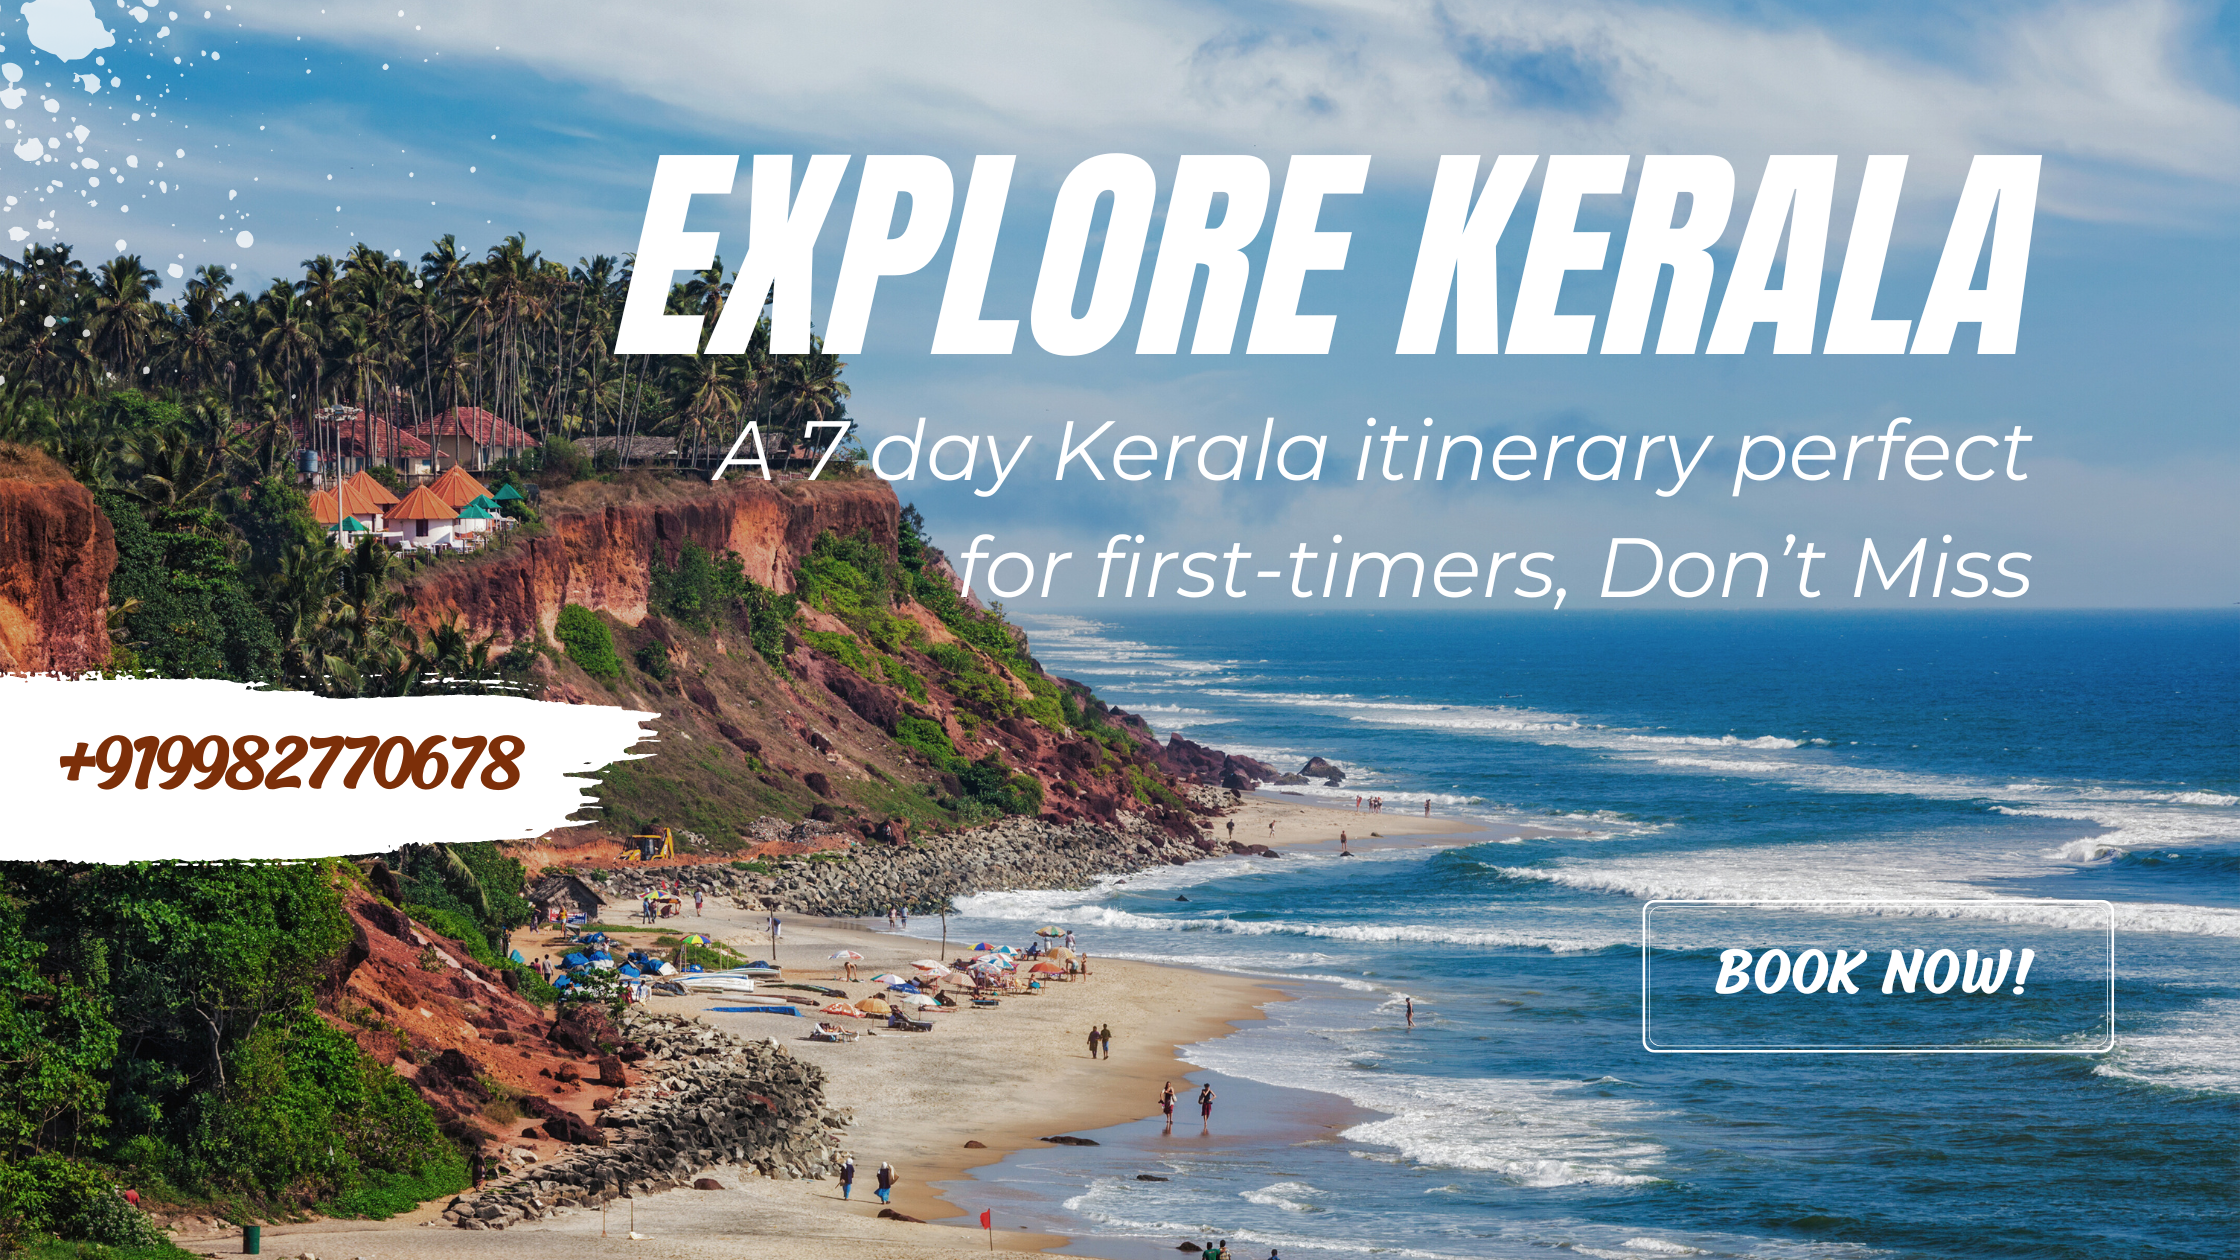 A 7 day Kerala itinerary perfect for first-timers